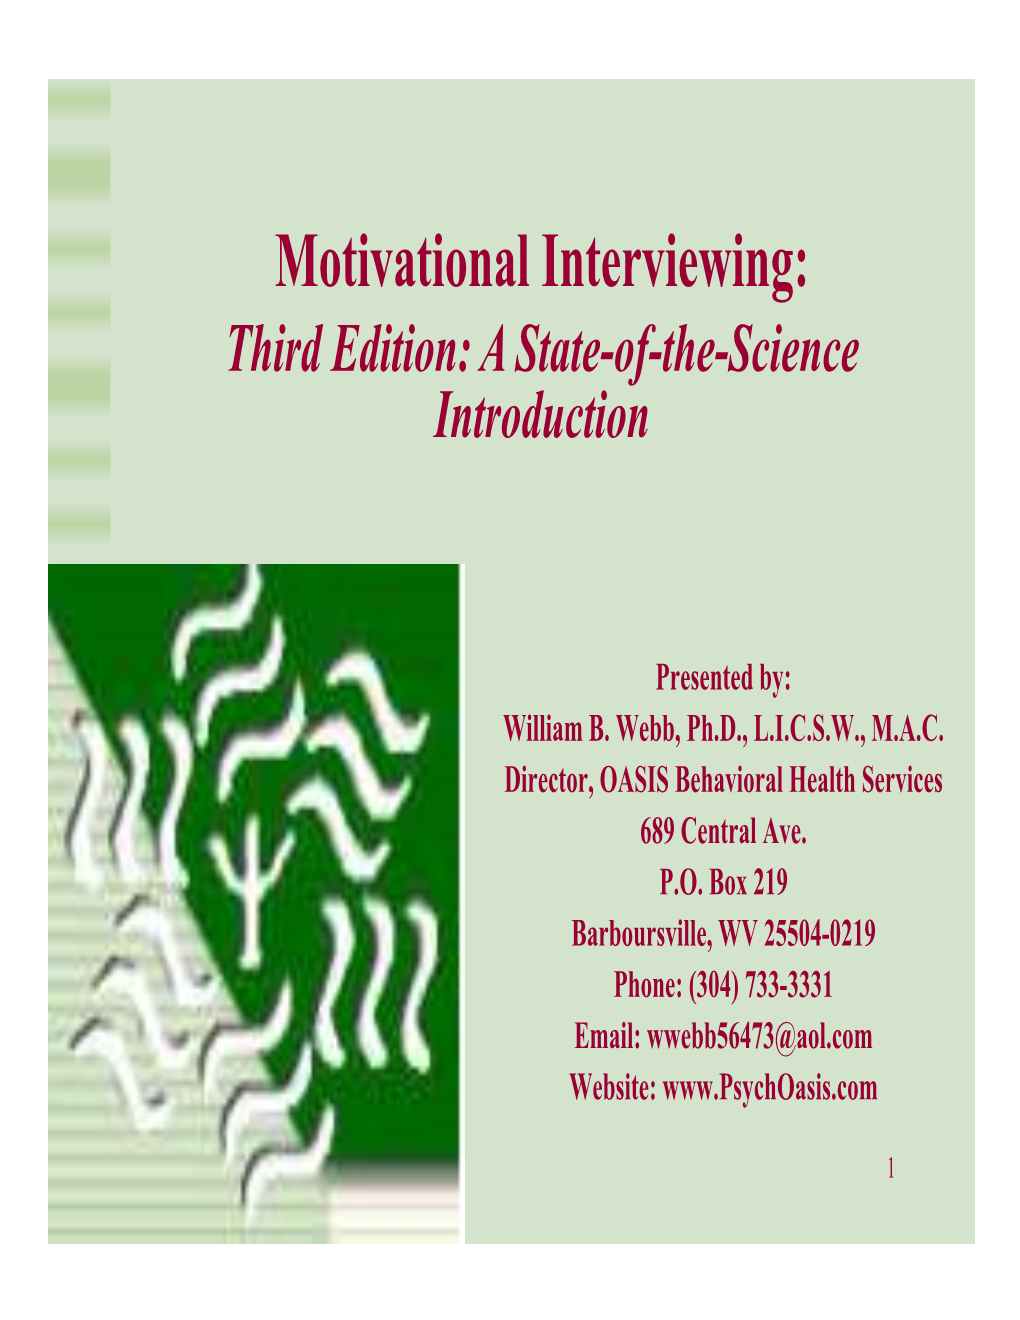 Motivational Interviewing: Third Edition: a State-Of-The-Science Introduction